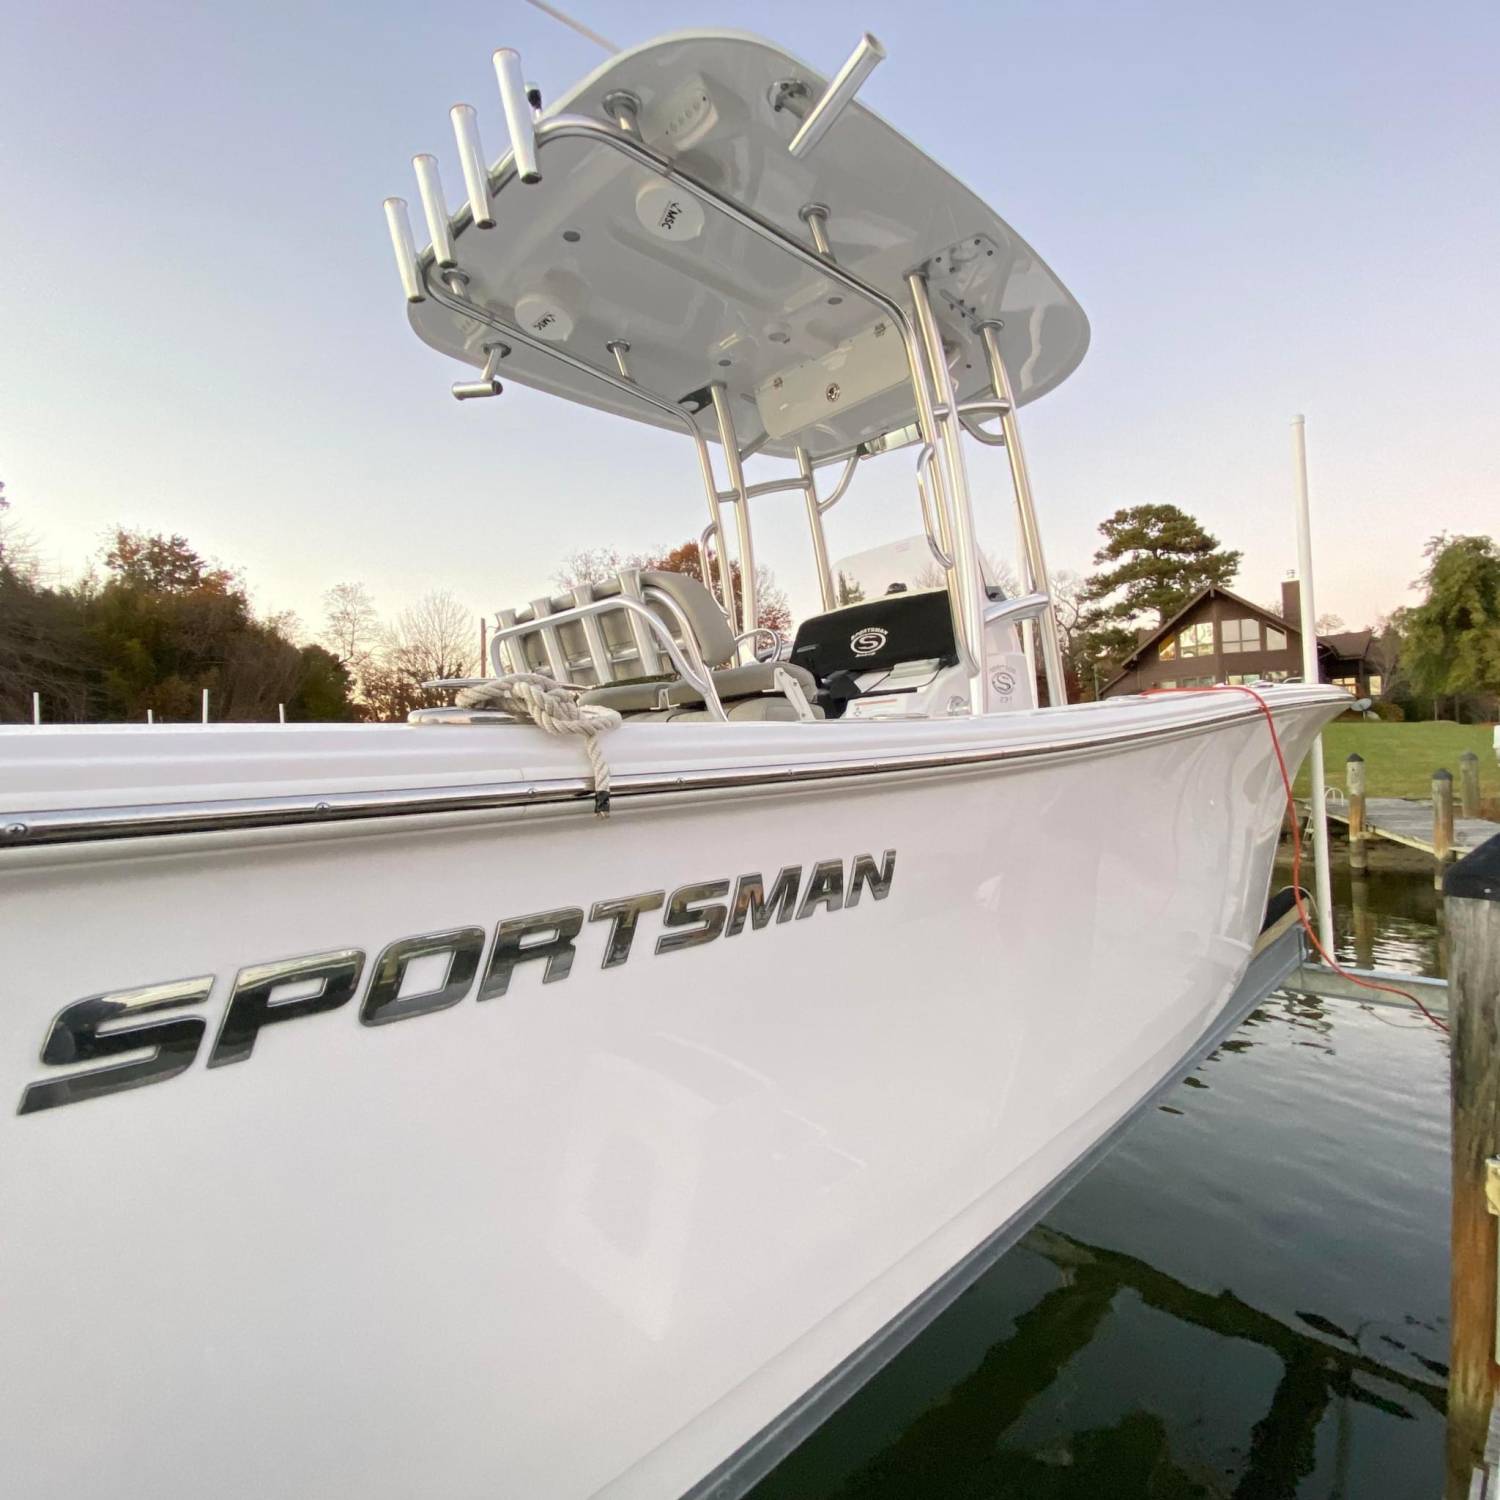 Title: BadAss - On board their Sportsman Heritage 231 Center Console - Location: Solomon Island MD. Participating in the Photo Contest #SportsmanNovember2023